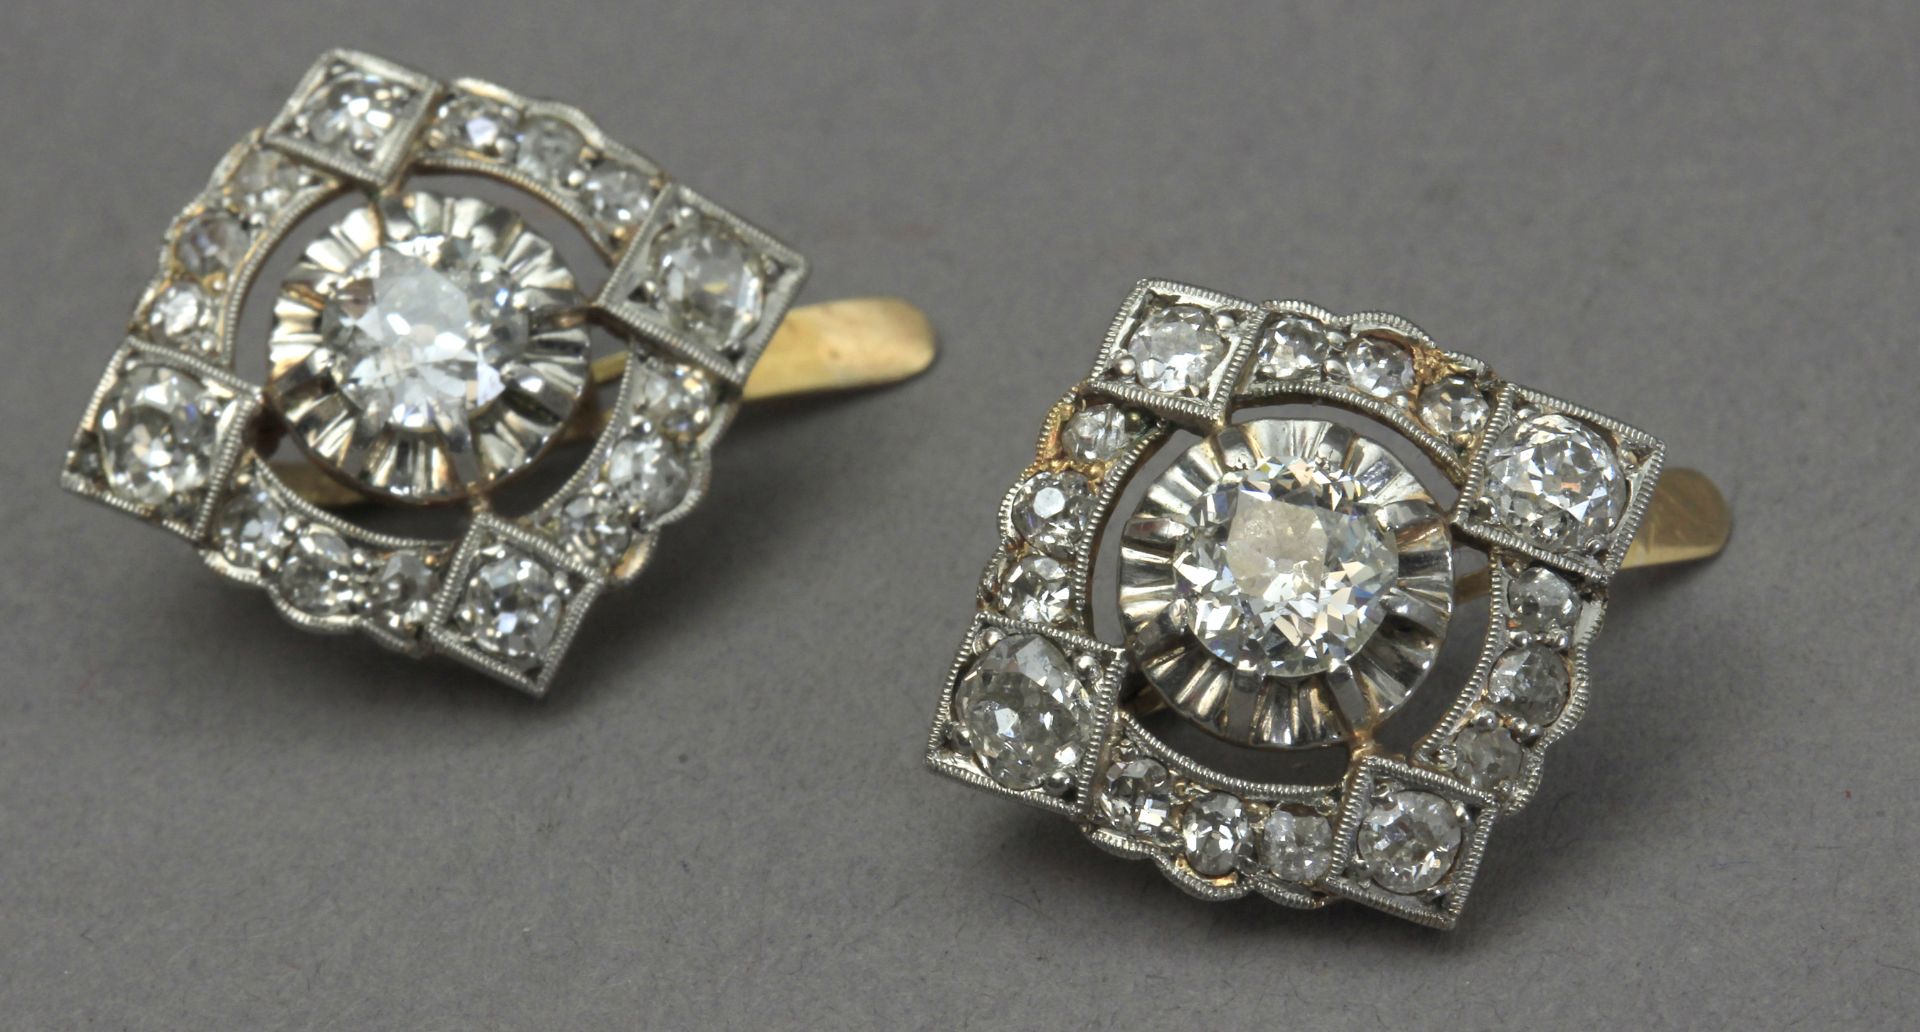 A pair of first half of 20th century diamond earrings